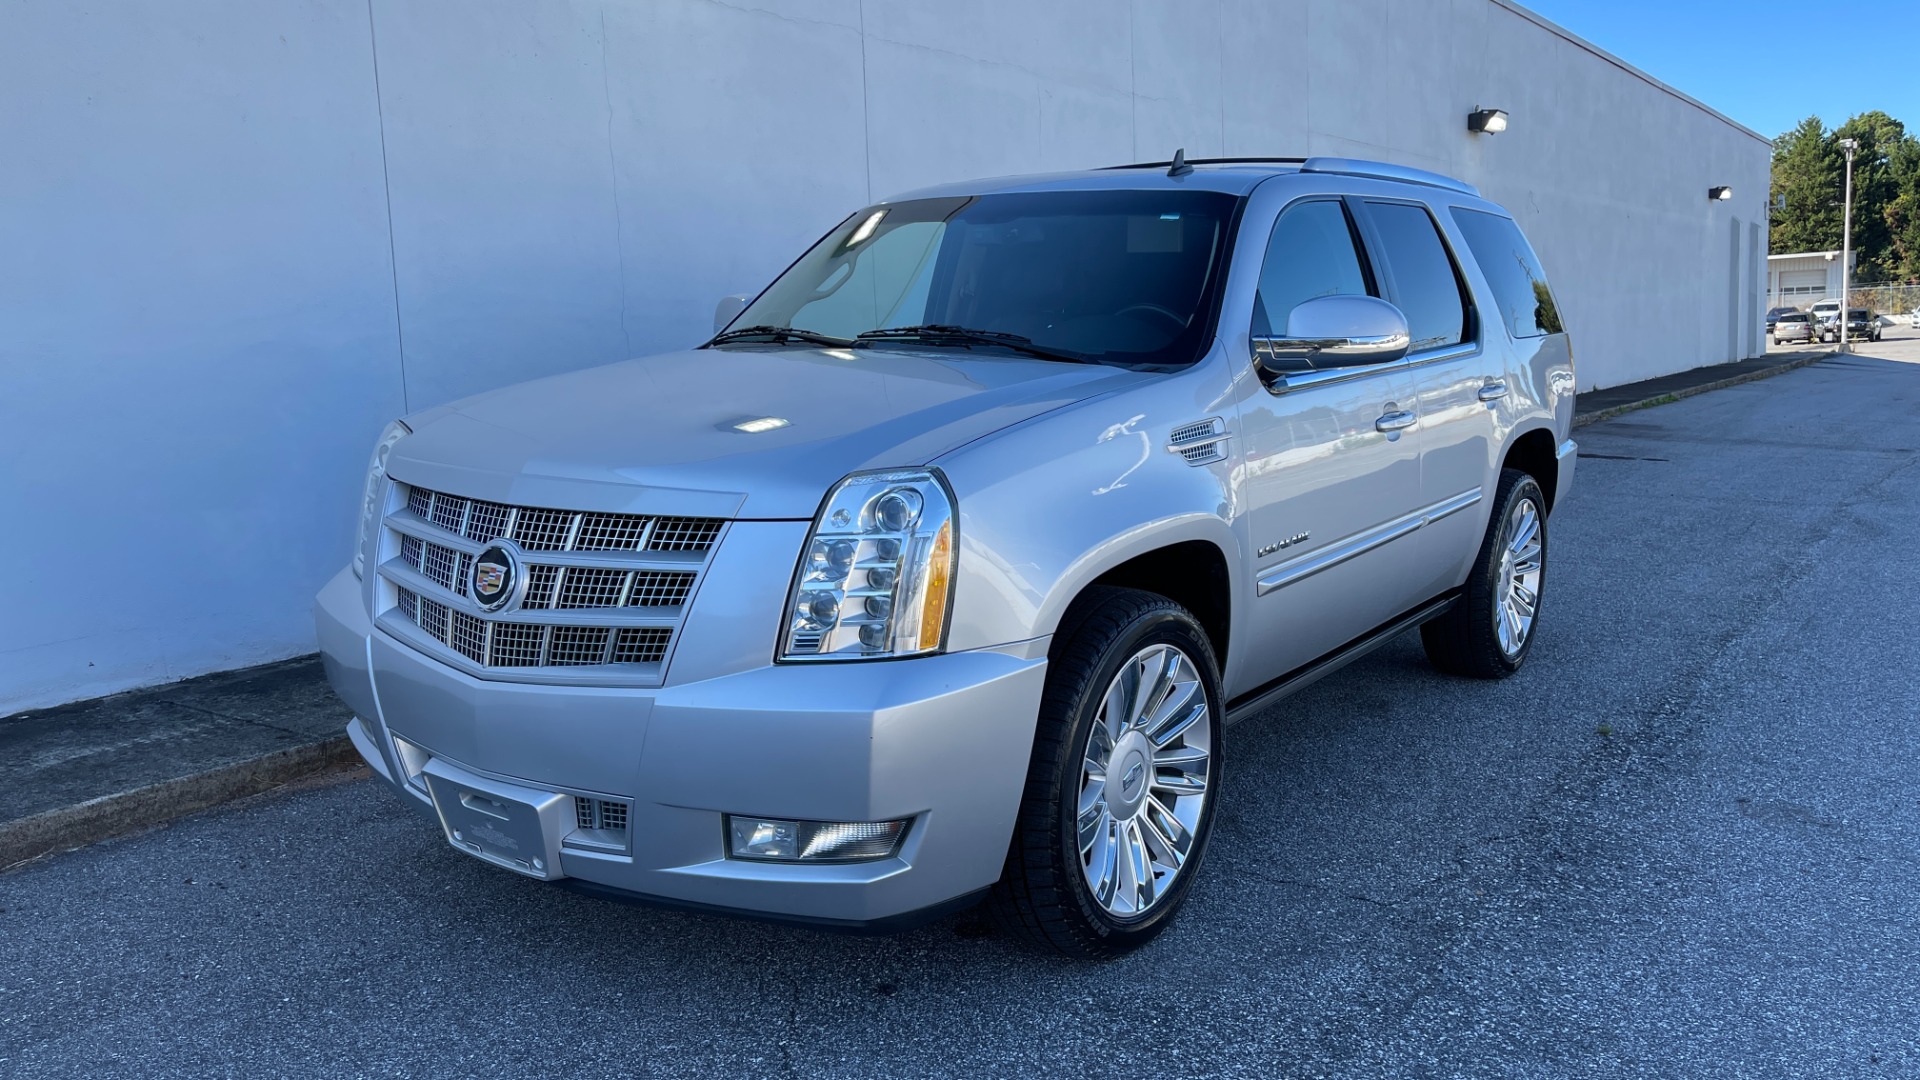 Used 2013 Cadillac Escalade PREMIUM / NAVIGATION / LEATHER / 3 ROW / AWD / LED LIGHTS for sale $25,599 at Formula Imports in Charlotte NC 28227 5